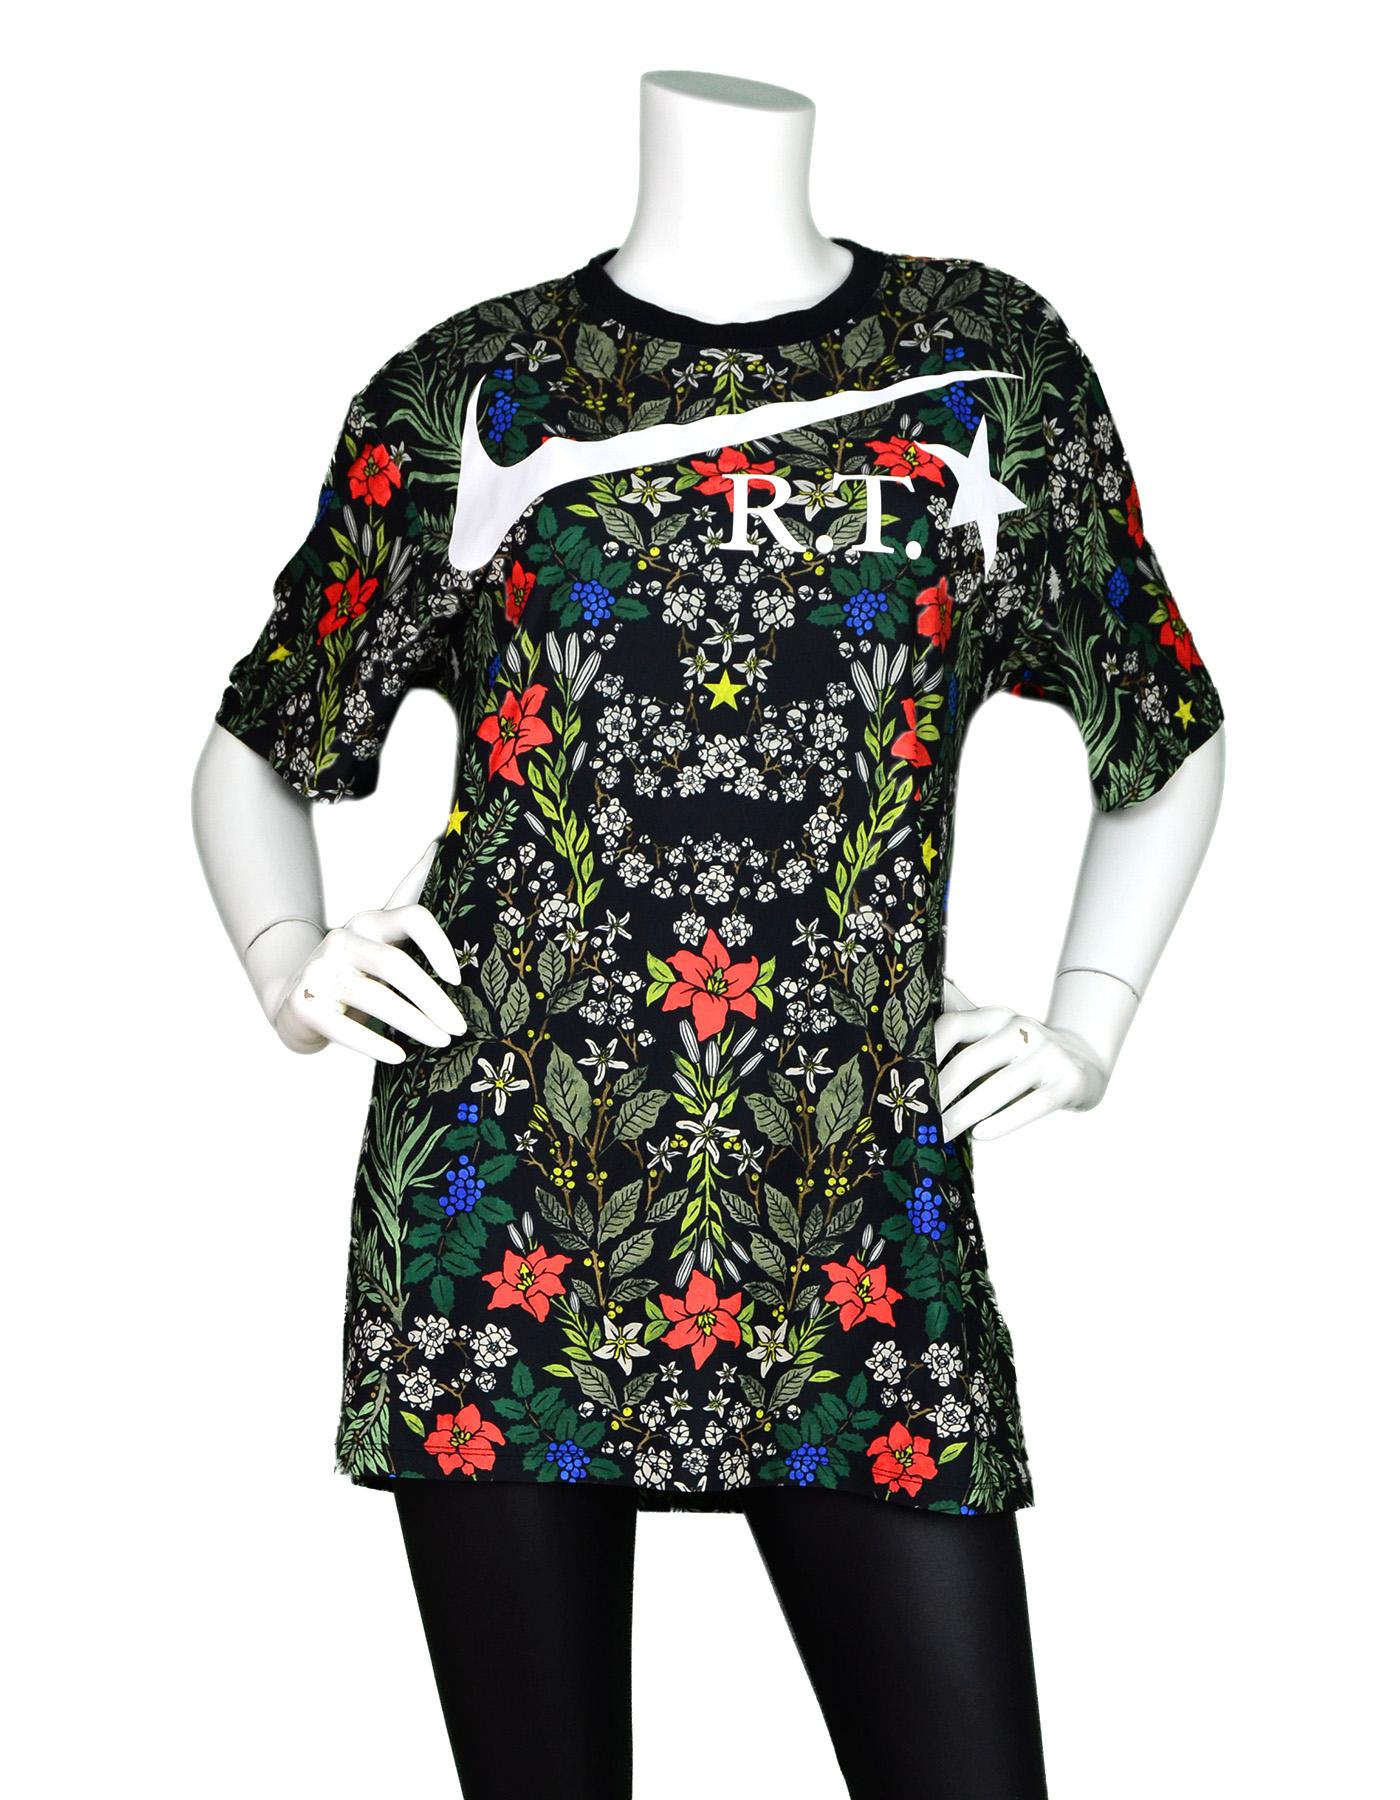 Nike Nikelab x Ricardo Tisci Limited Edition Floral T-Shirt Sz M

Made In: Sri Lanka
Year of Production:  2016
Color: Black and multi-color floral print
Materials: 79% polyester, 21% elastane 
Opening/Closure: Pull over
Overall Condition: Excellent